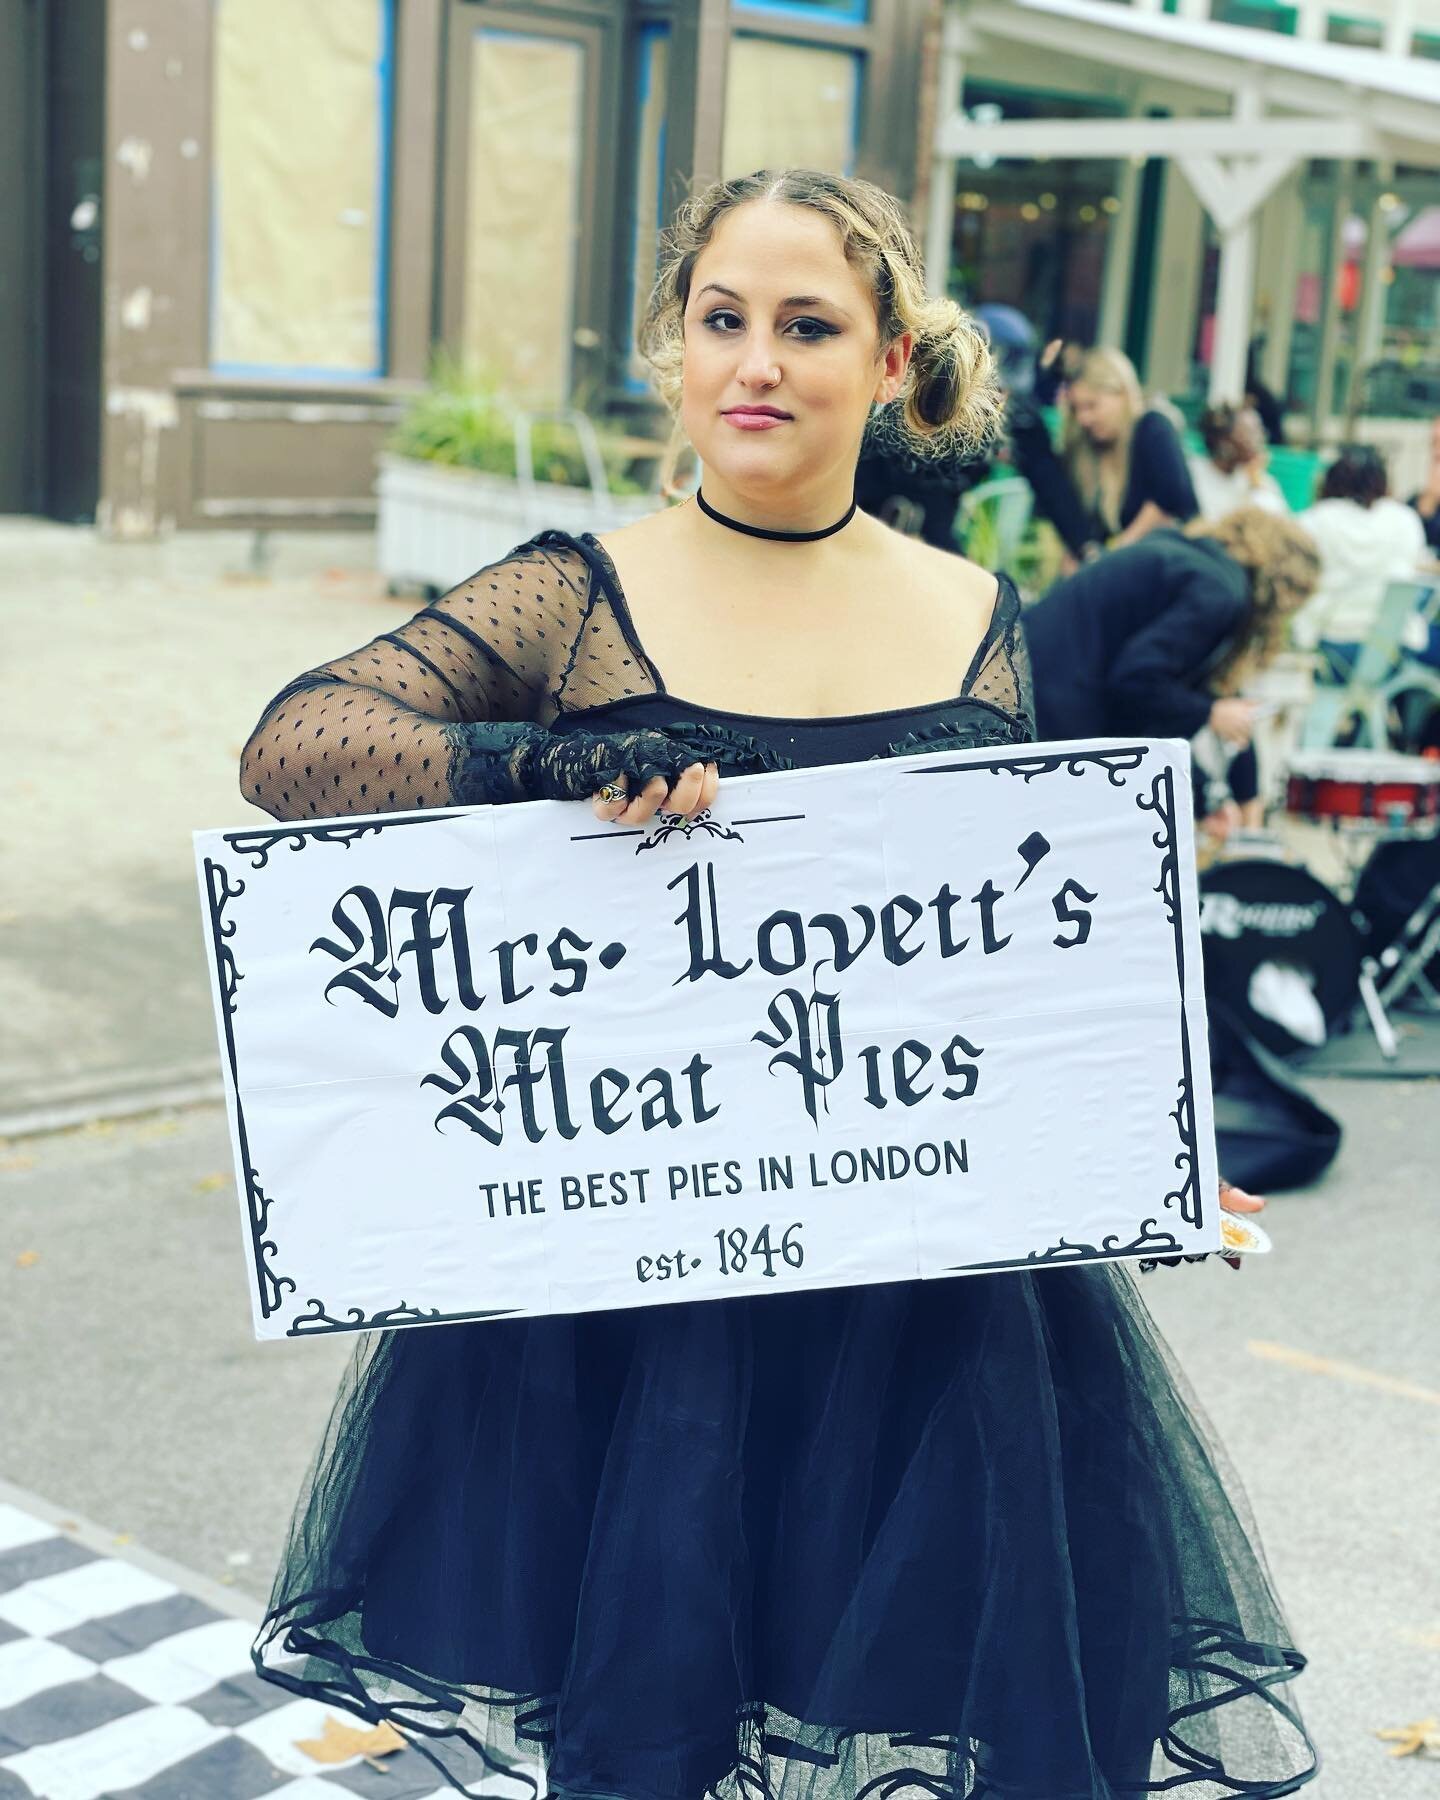 Fancy a pie? What a show! Thank you Vanderbilt!!! Here&rsquo;s our fearless Mrs Lovett!!!

#rooftopmusicalsociety #sweeneytodd #balladofsaraberry #vanderbiltopenstreets @vanderbiltopenstreets @rachz